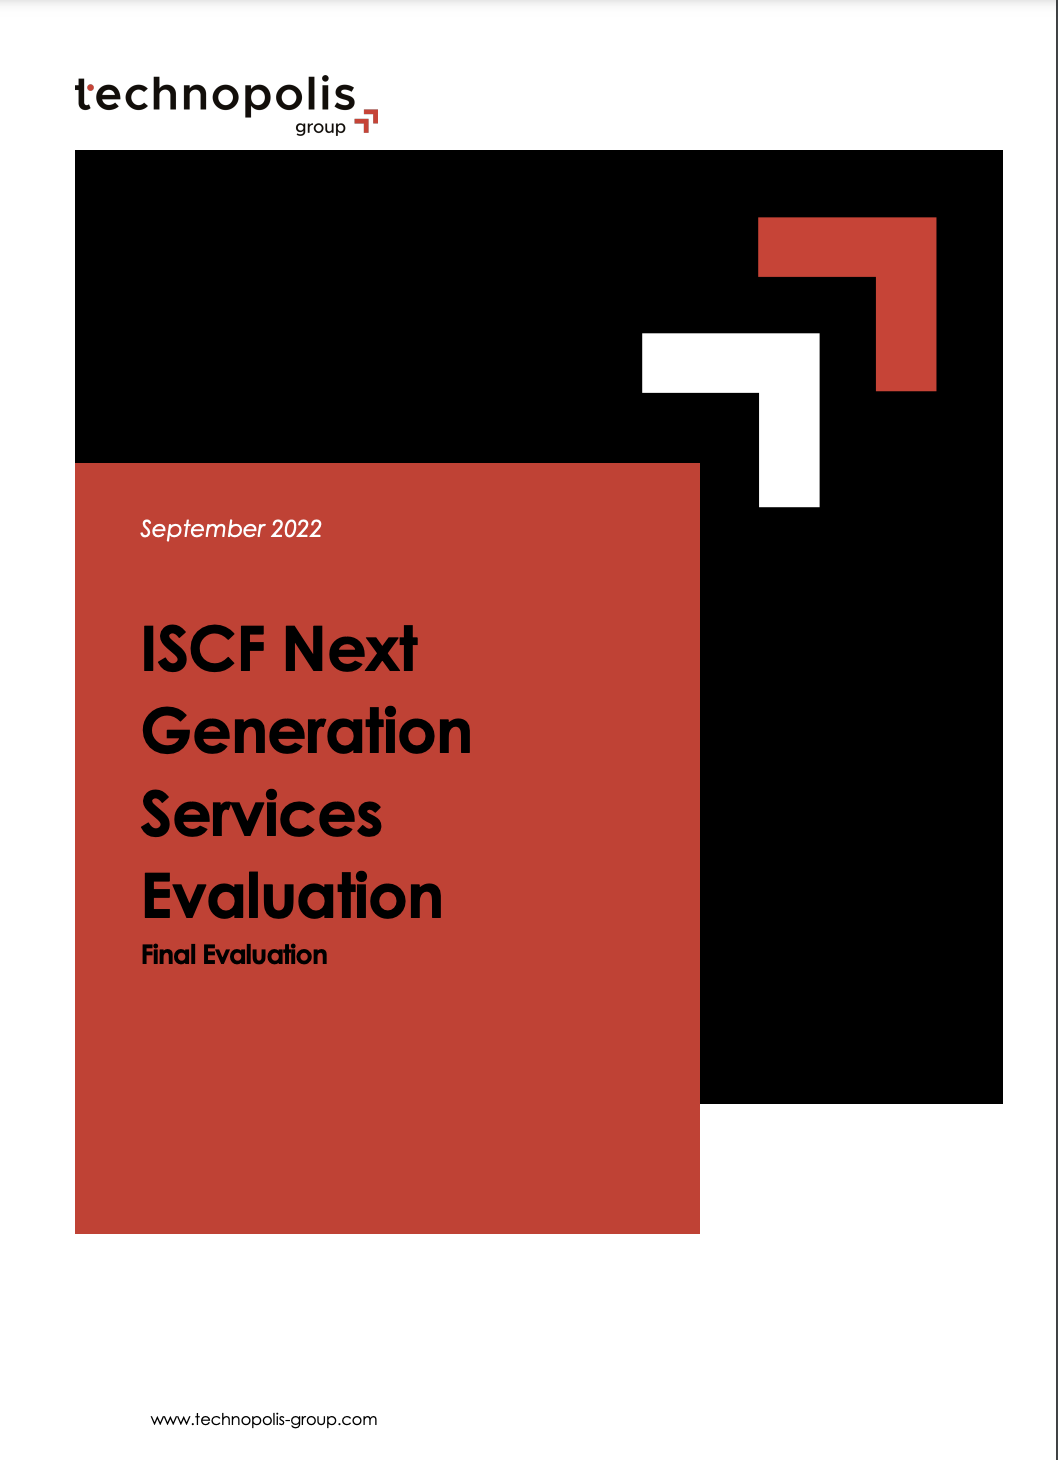 Evaluation of the Industrial Strategy Challenge Fund for Next Generation Services